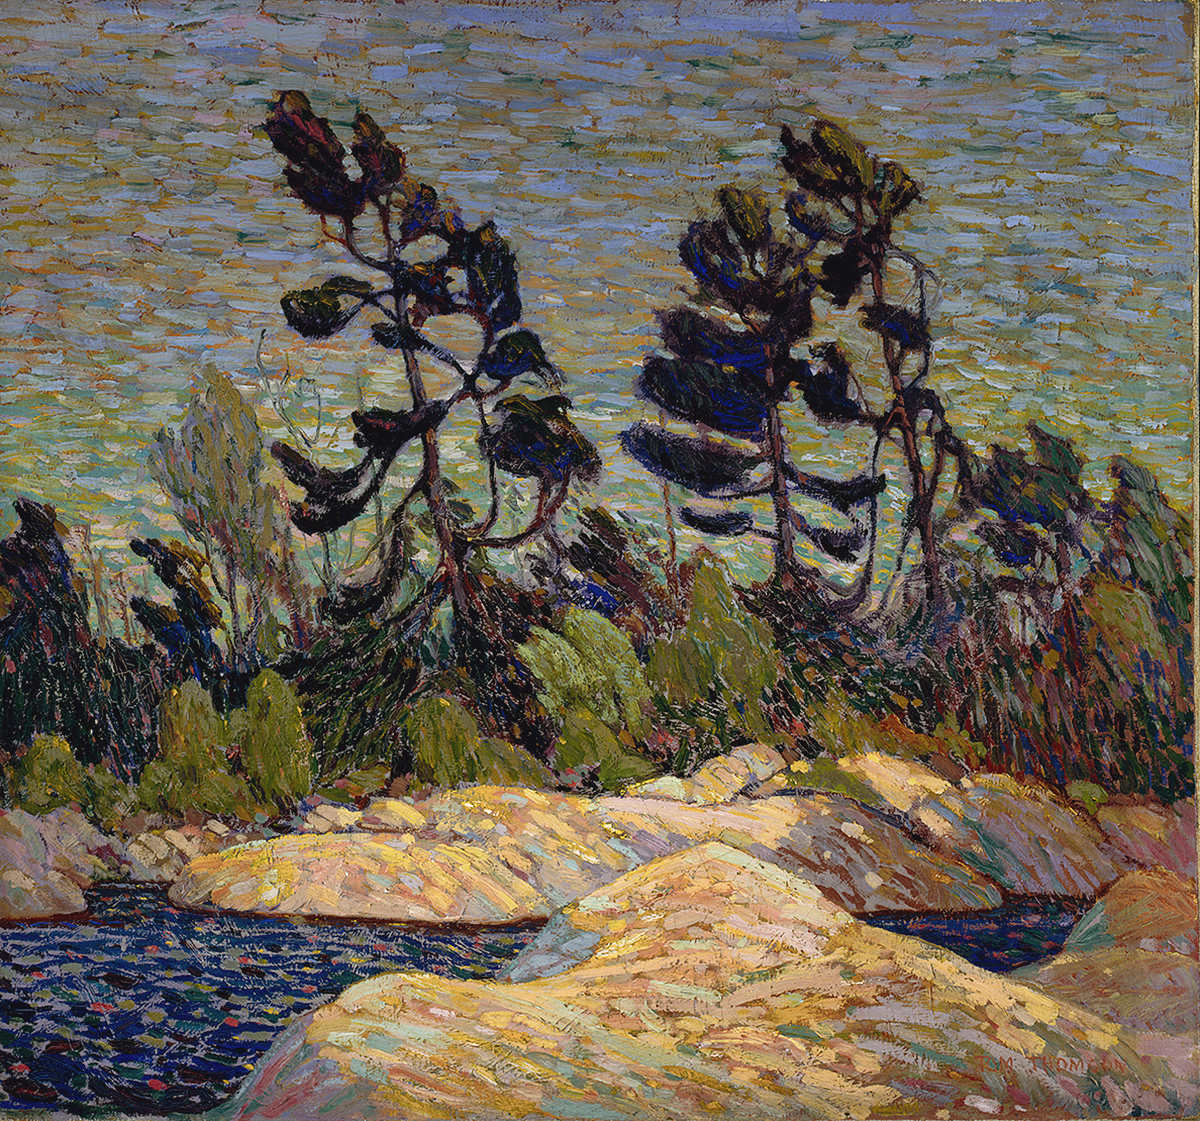 Painting of rocky landscape with pine trees behind the rocks and water in between